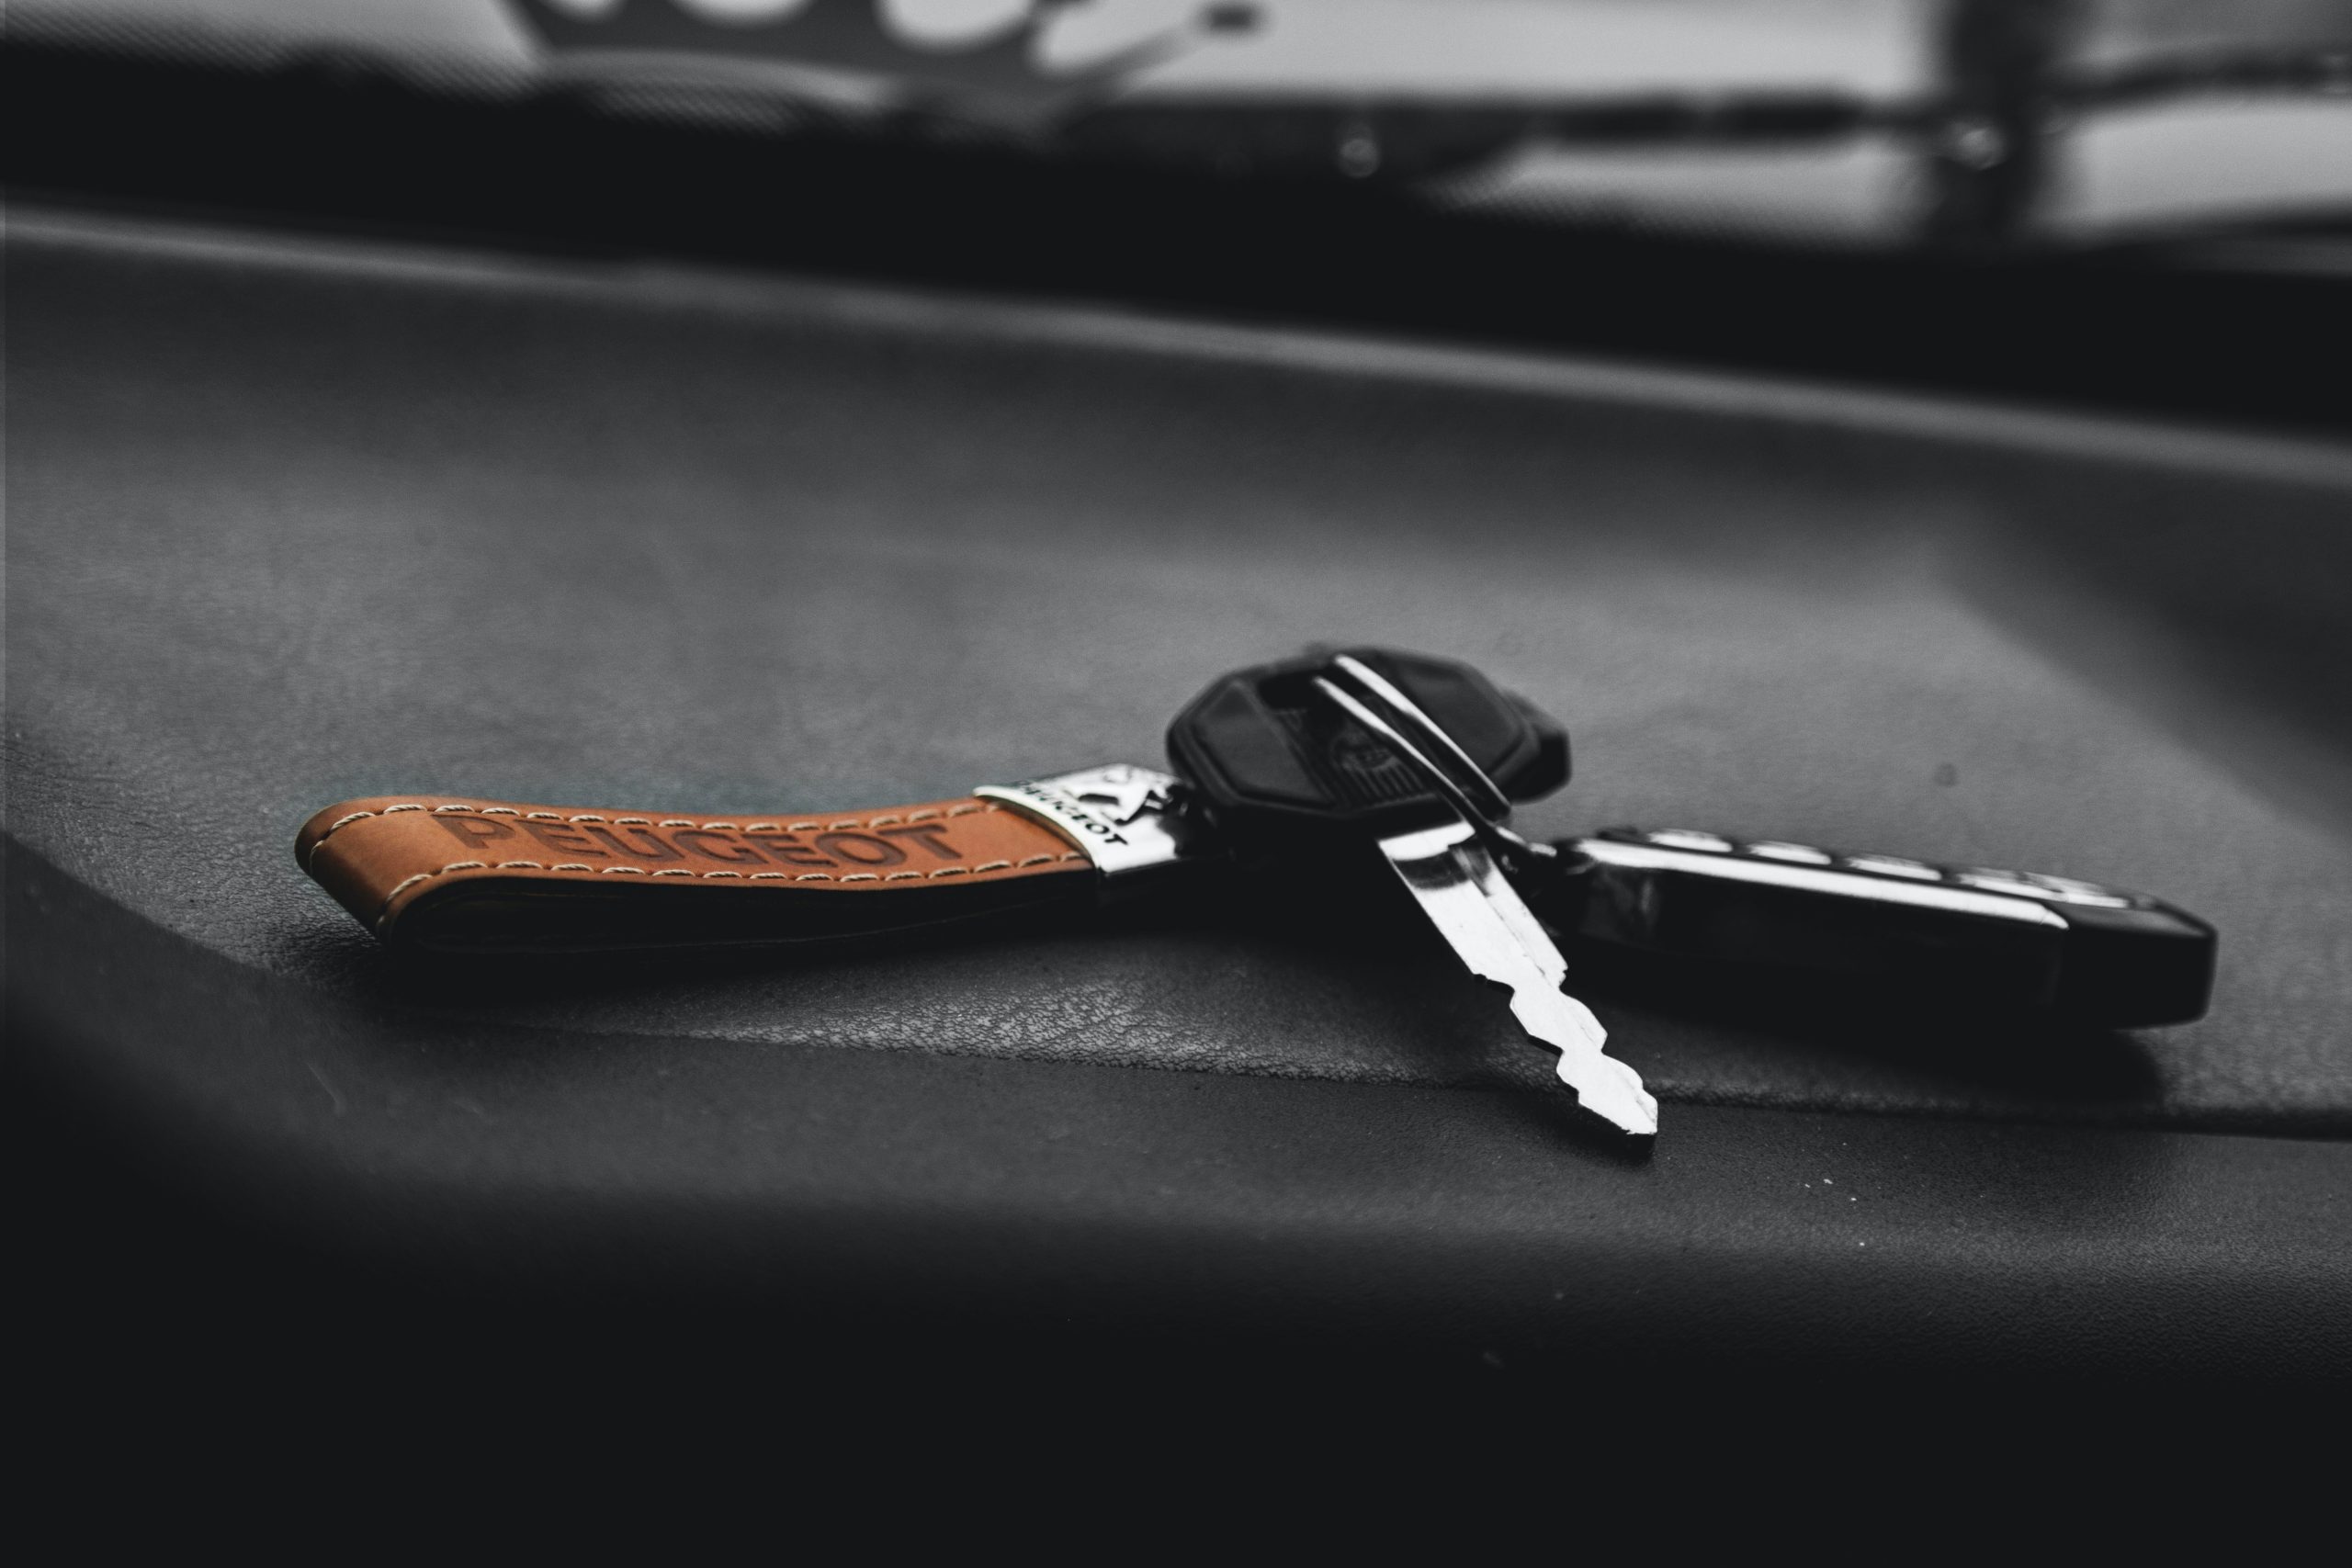 How to find lost remote car key